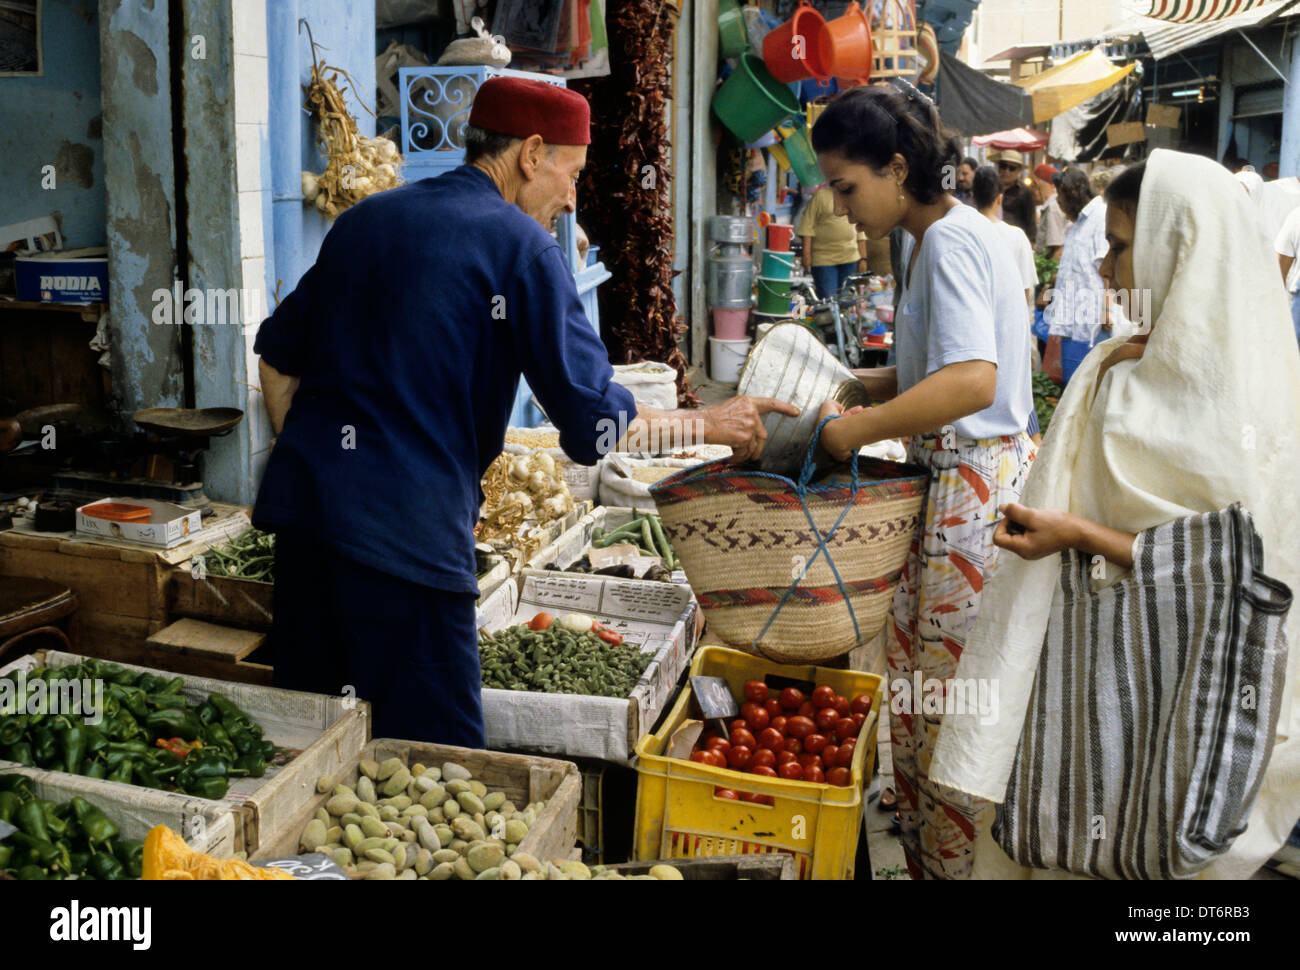 Tunis, Tunisia. Vegetable Vendor. Tunisian Women Wearing Modern and Traditional Styles of Dress. Stock Photo